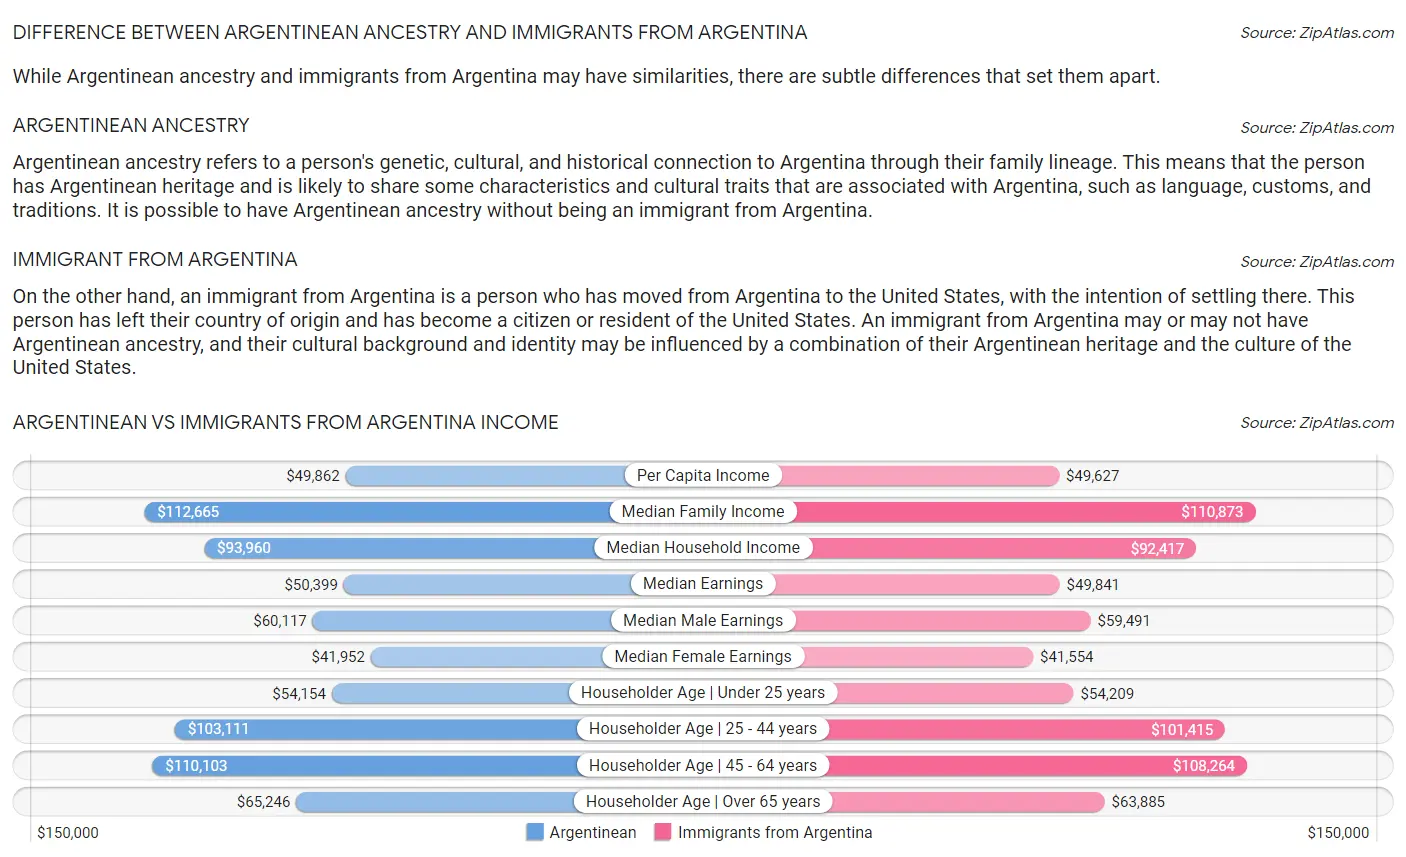 Argentinean vs Immigrants from Argentina Income